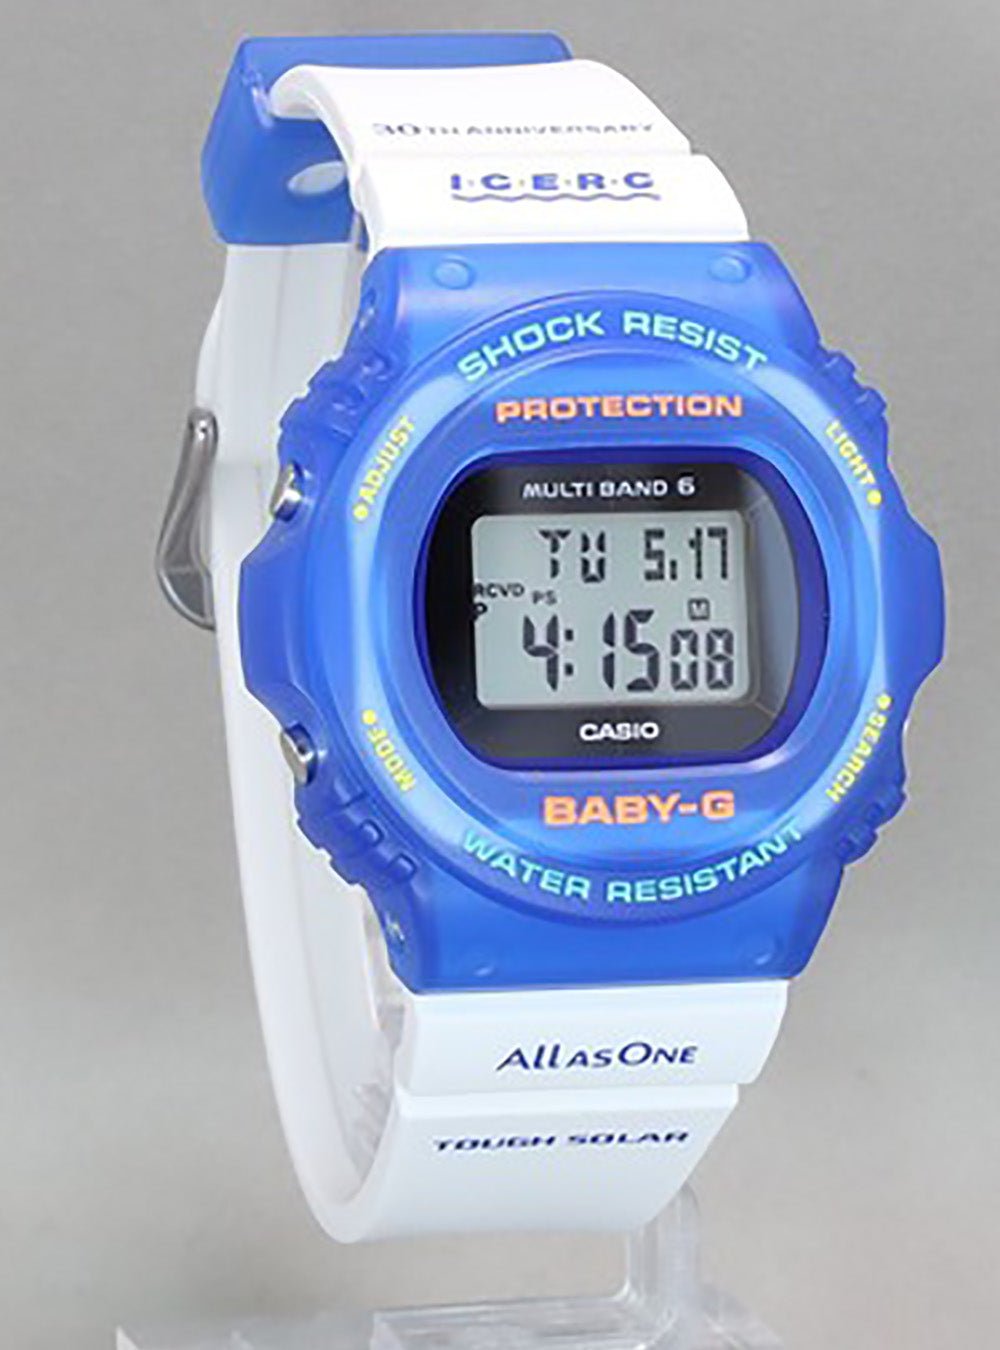 CASIO BABY-G LOVE THE SEA AND THE EARTH BGD-5700UK-2JR LIMITED EDITION JDM